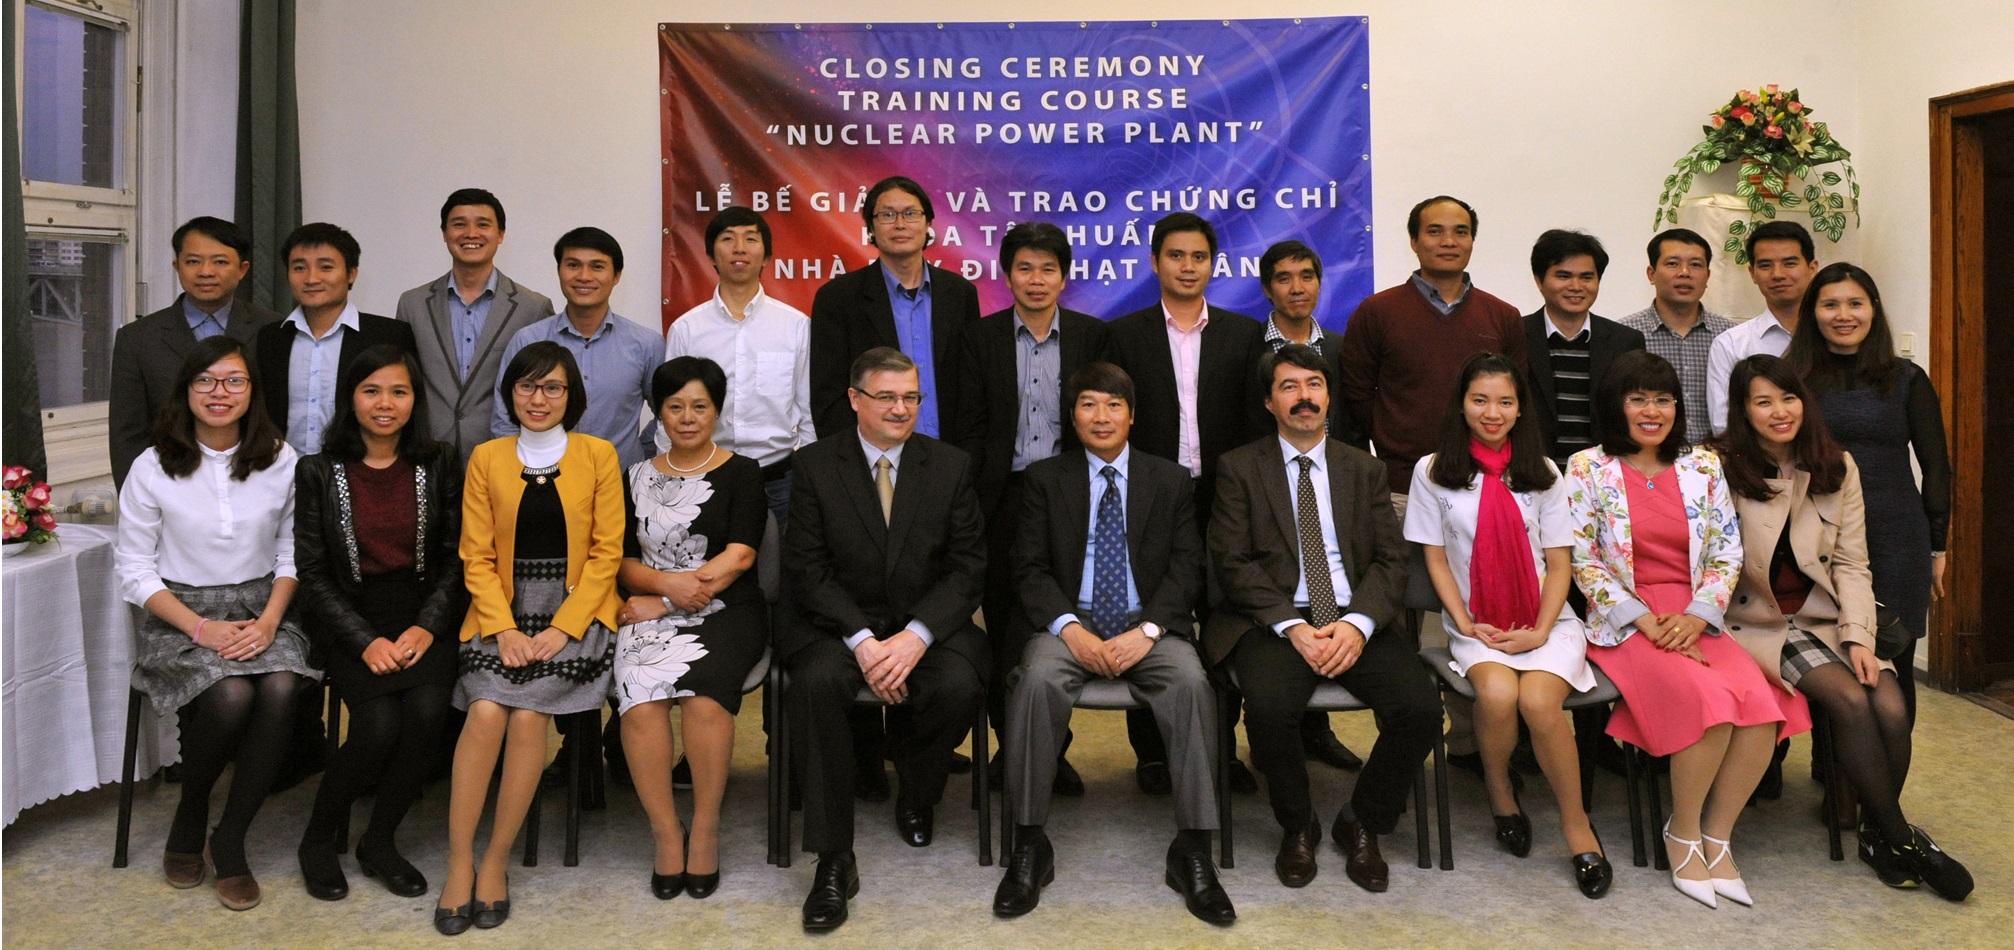 Closing ceremony of nuclear training - 2015